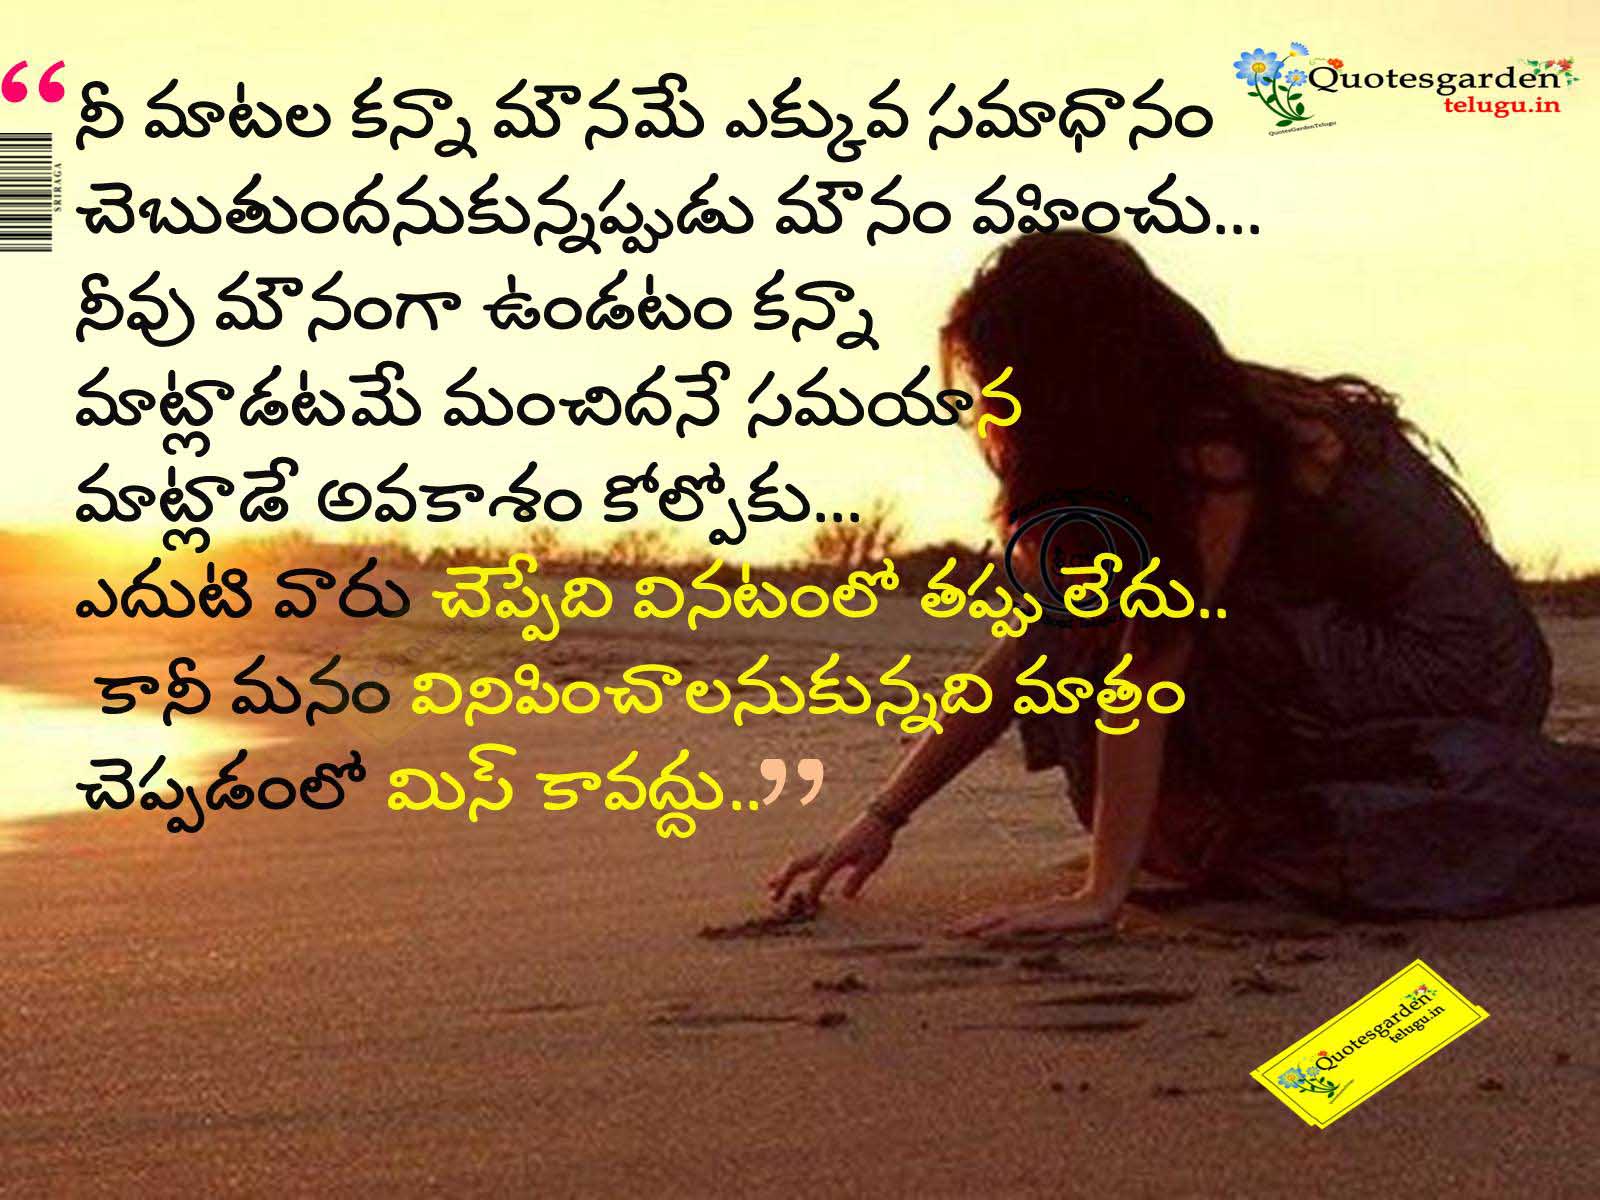 Best Telugu inspirational Life Quotes with images